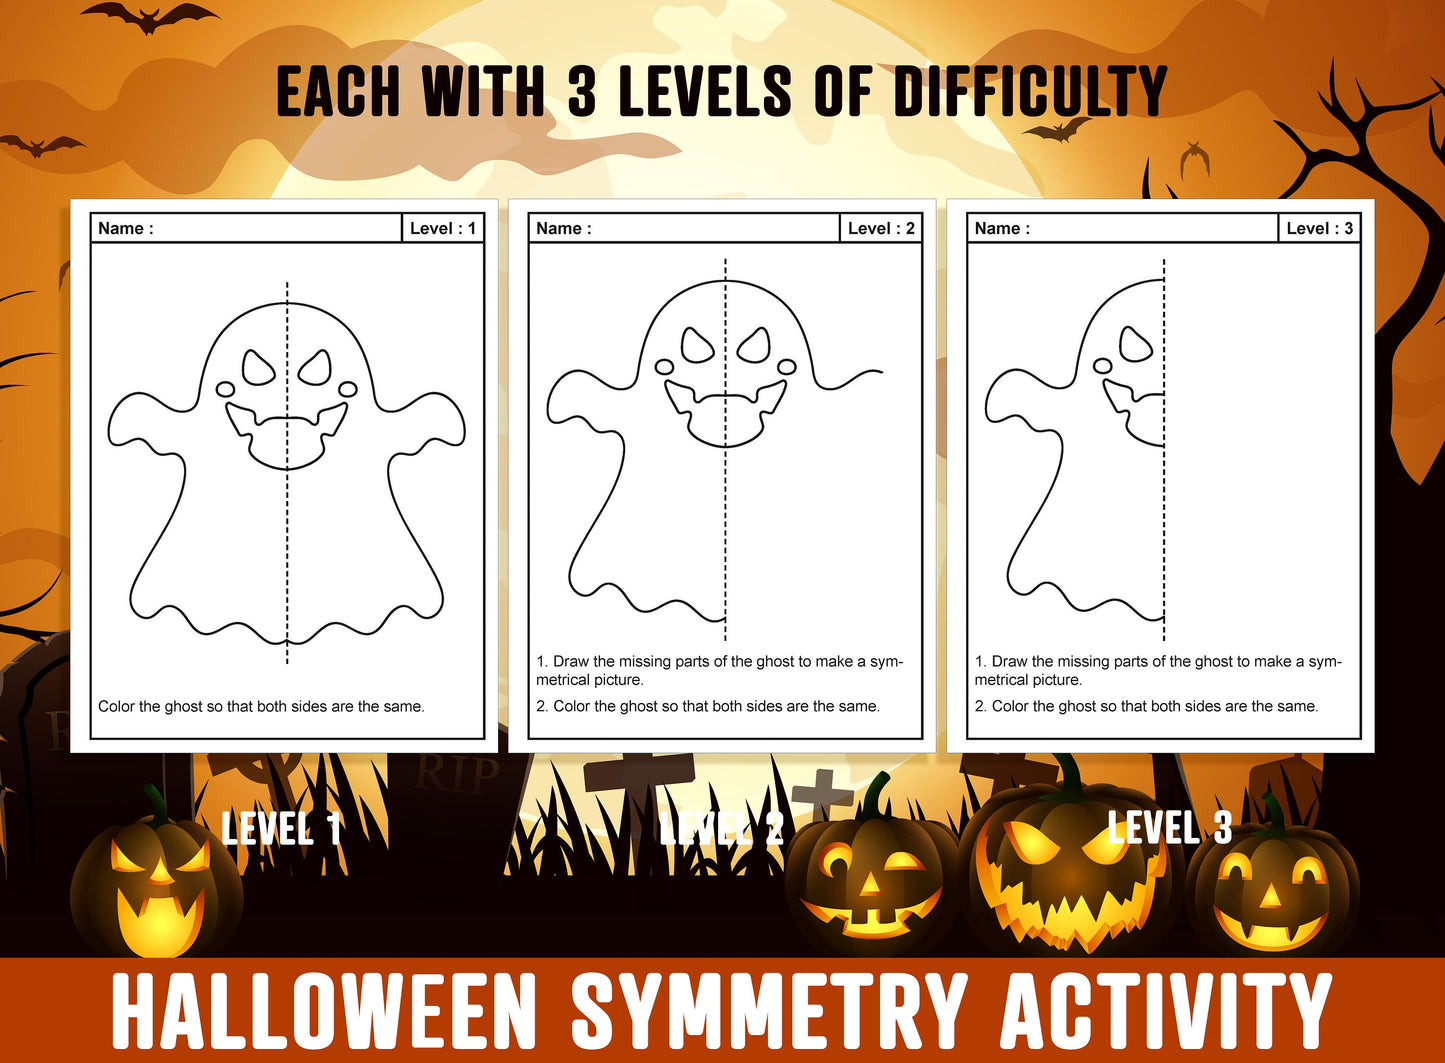 Halloween Symmetry Worksheet, Halloween Theme Lines of Symmetry Activity, 24 Pages, Includes 8 Designs, Each With 3 Levels of Difficulty